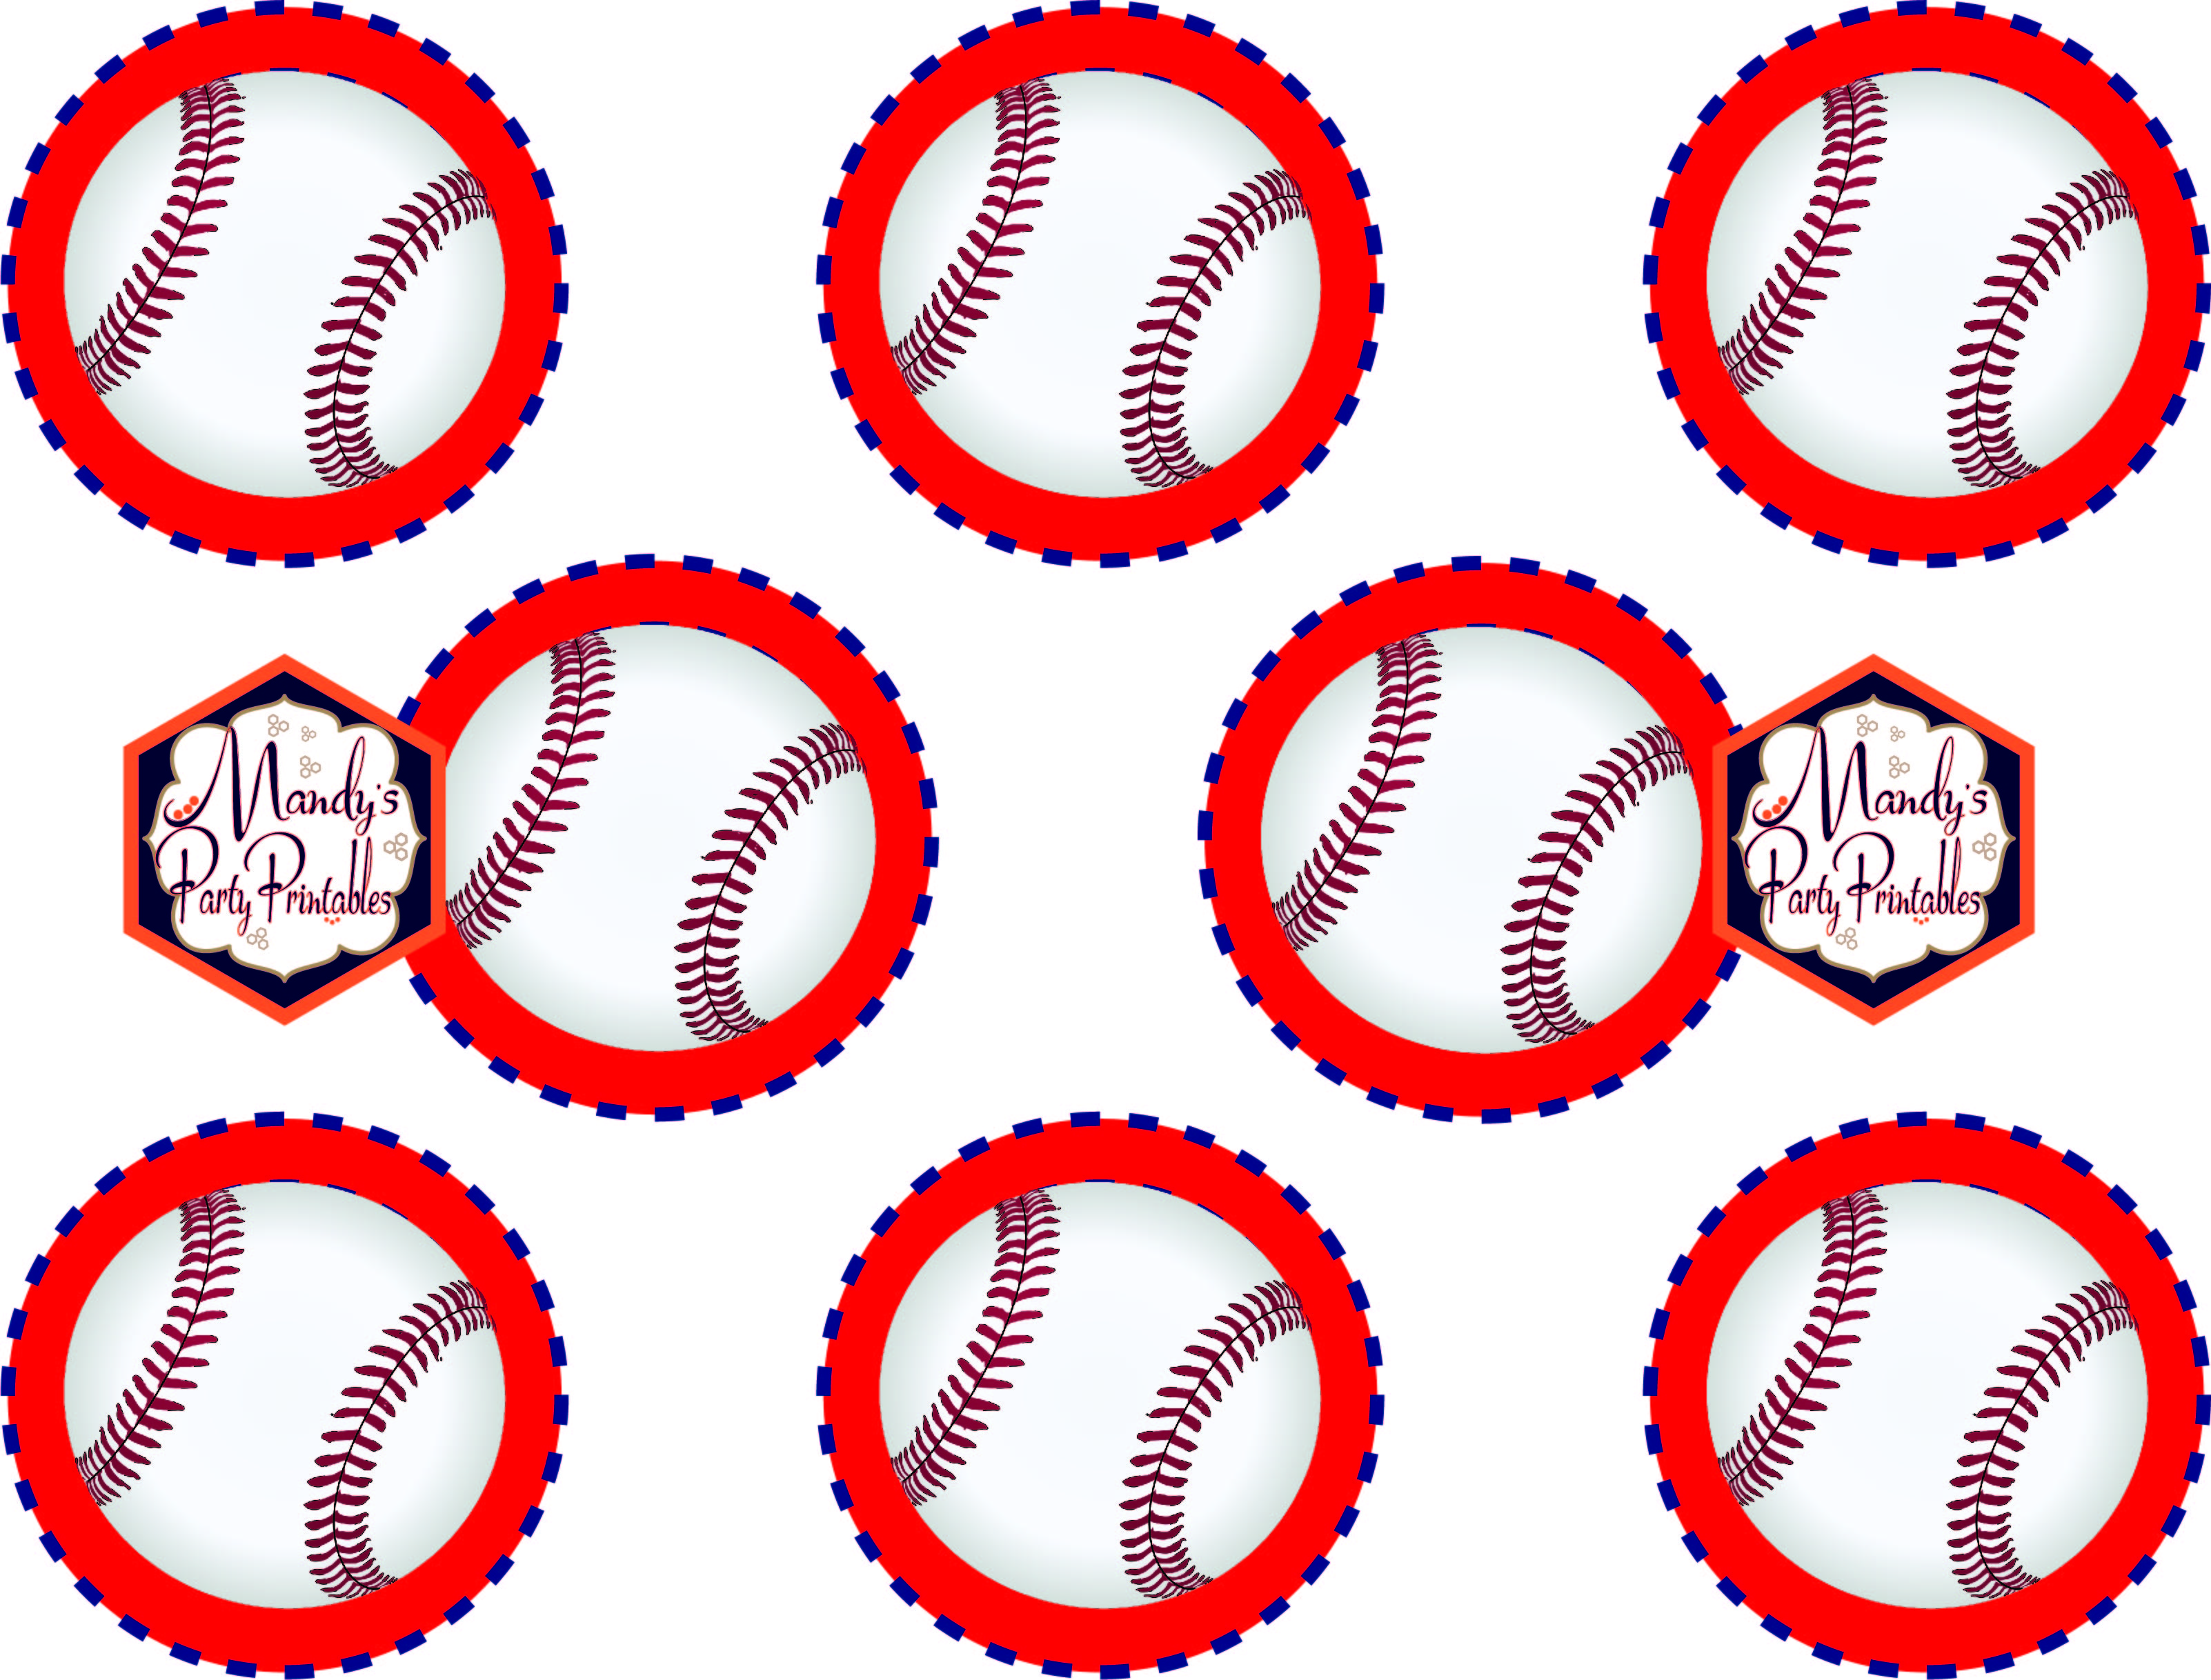 Cupcake Toppers from the Free Baseball Printables via Mandy's Party Printables